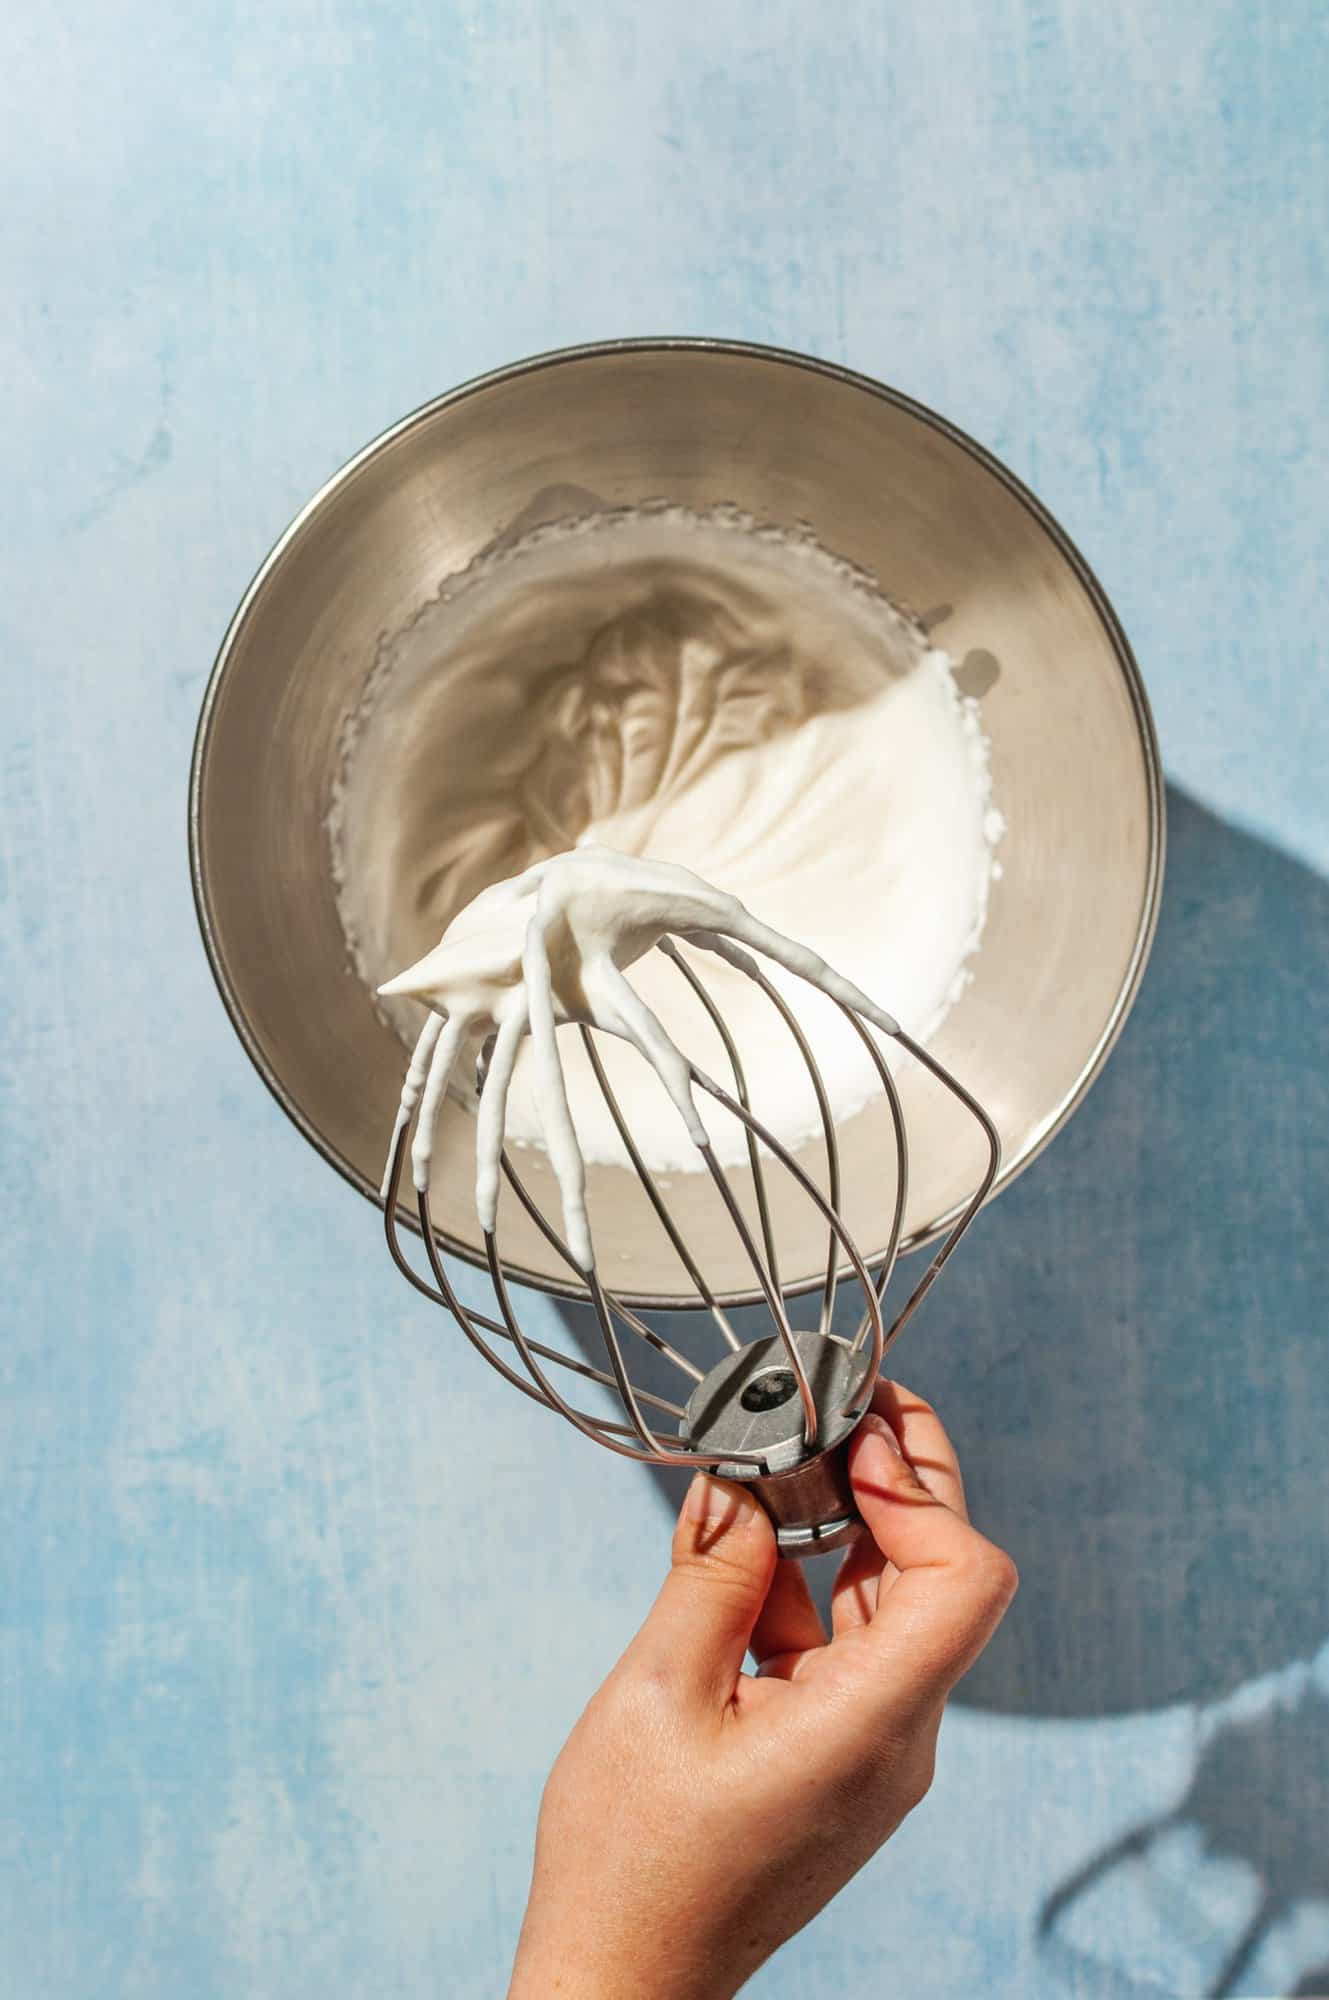 whisk over bowl of whipped cream whipped to stiff peaks